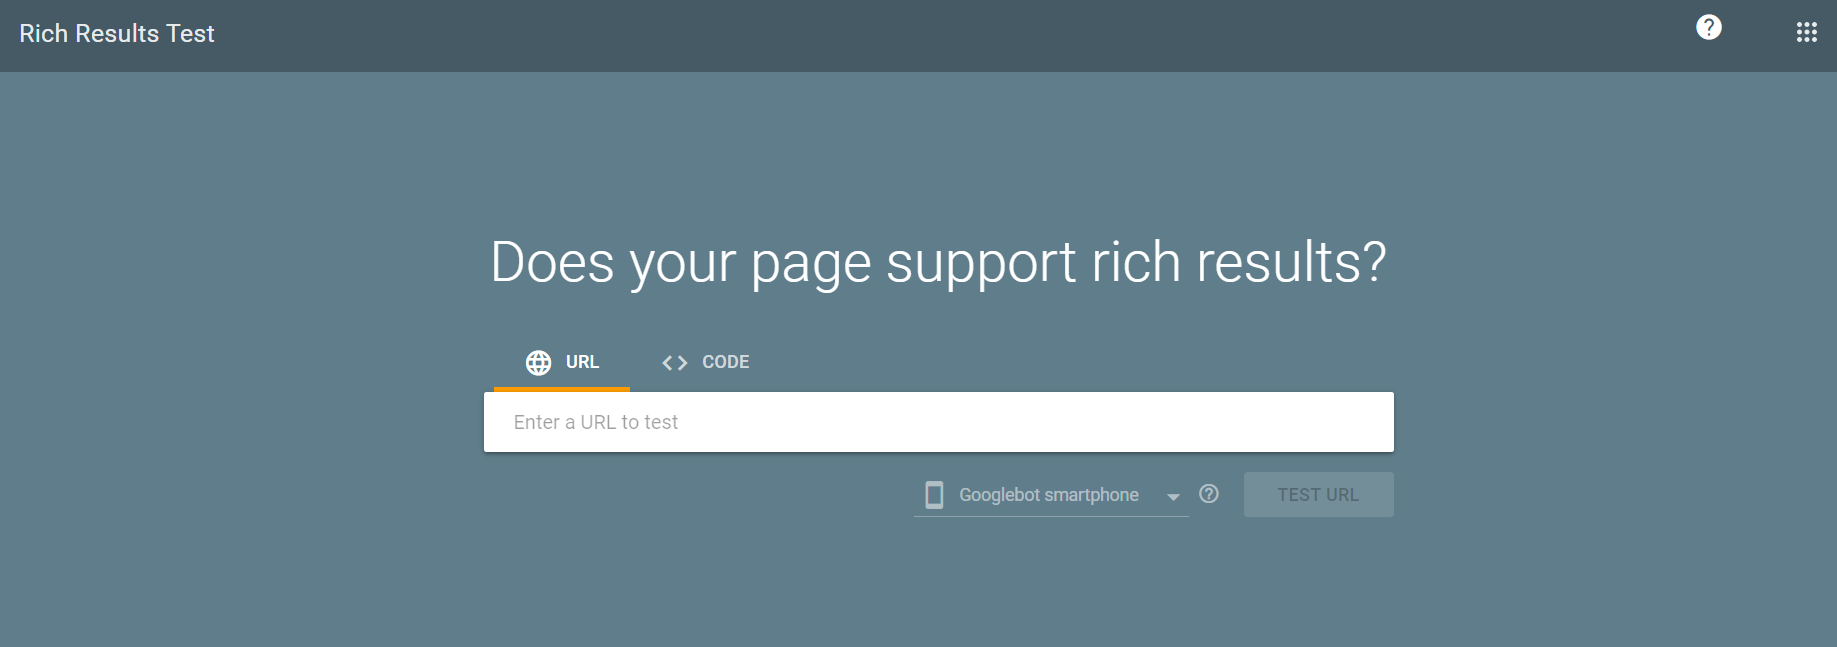 Google's rich results testing tool